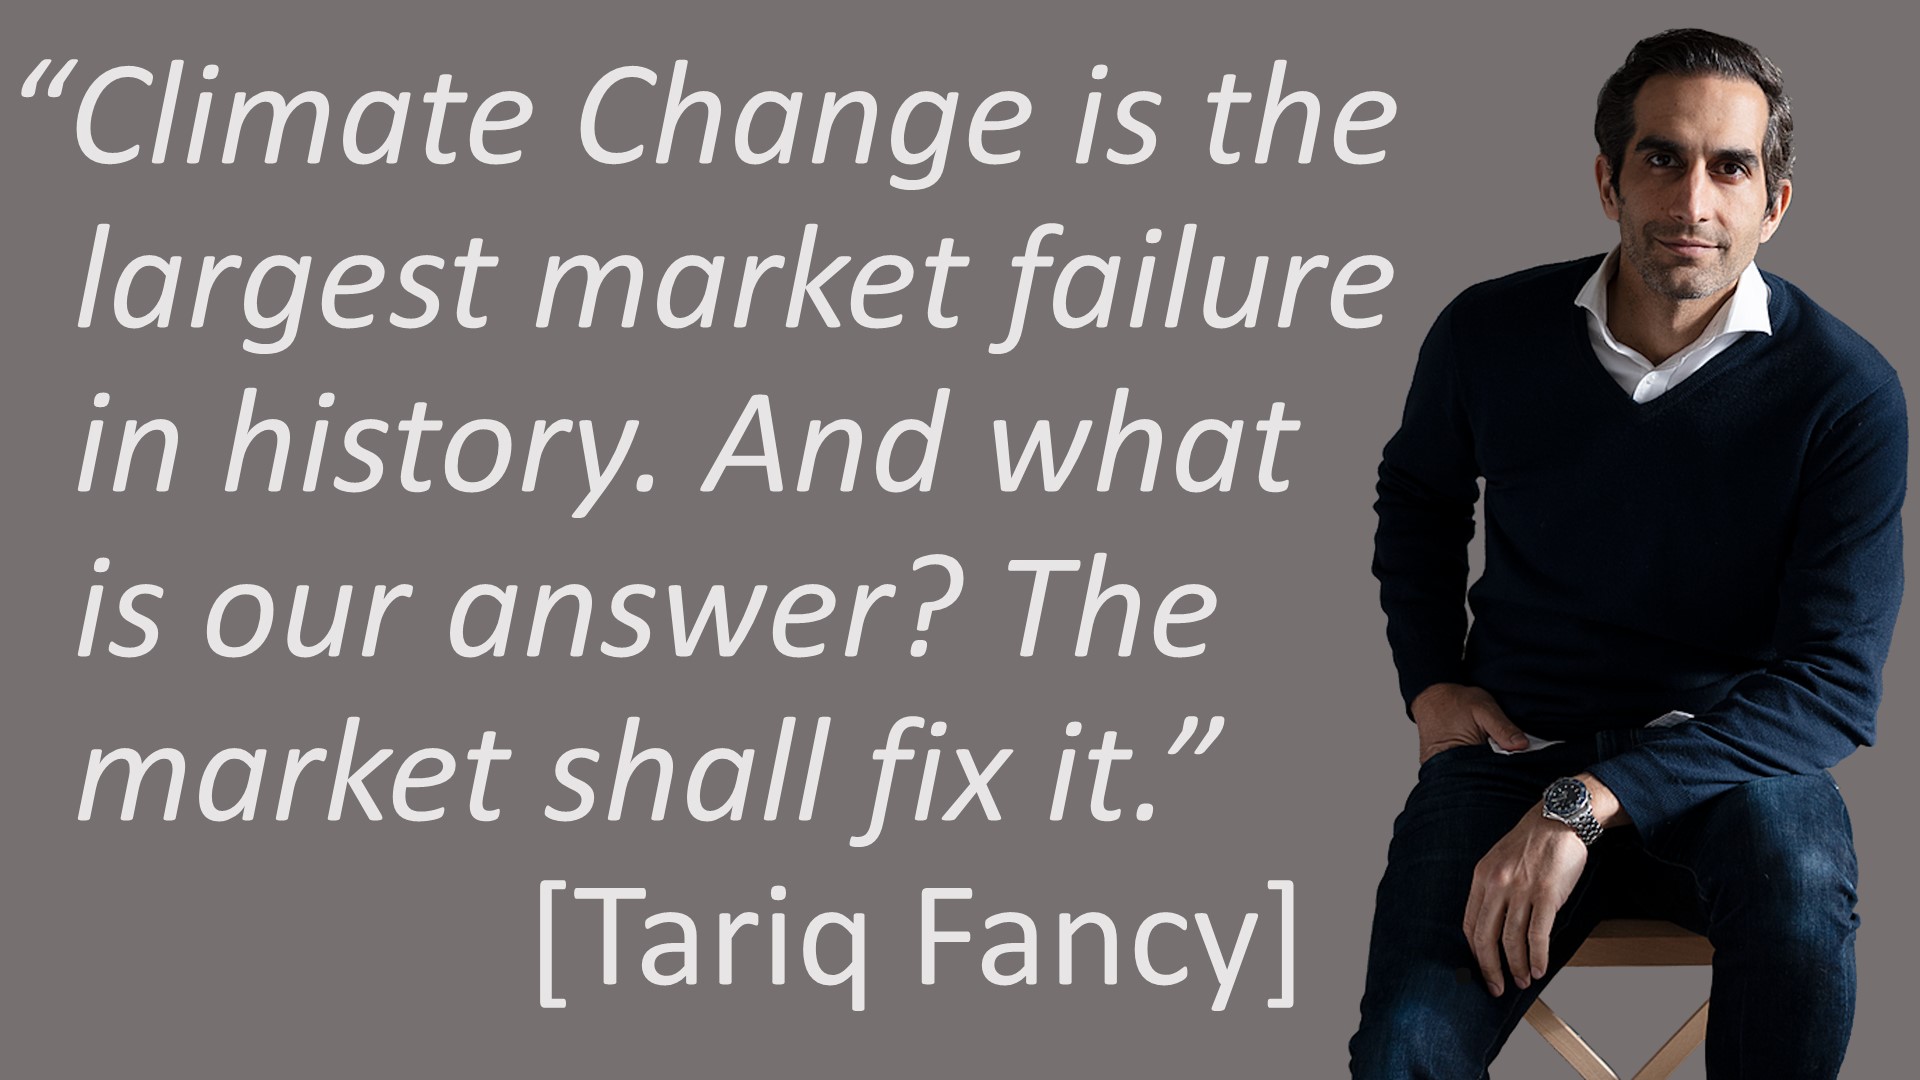 Climate Change is the largest market failure in history. And what is our answer? The market shall fix it. [Tariq Fancy]